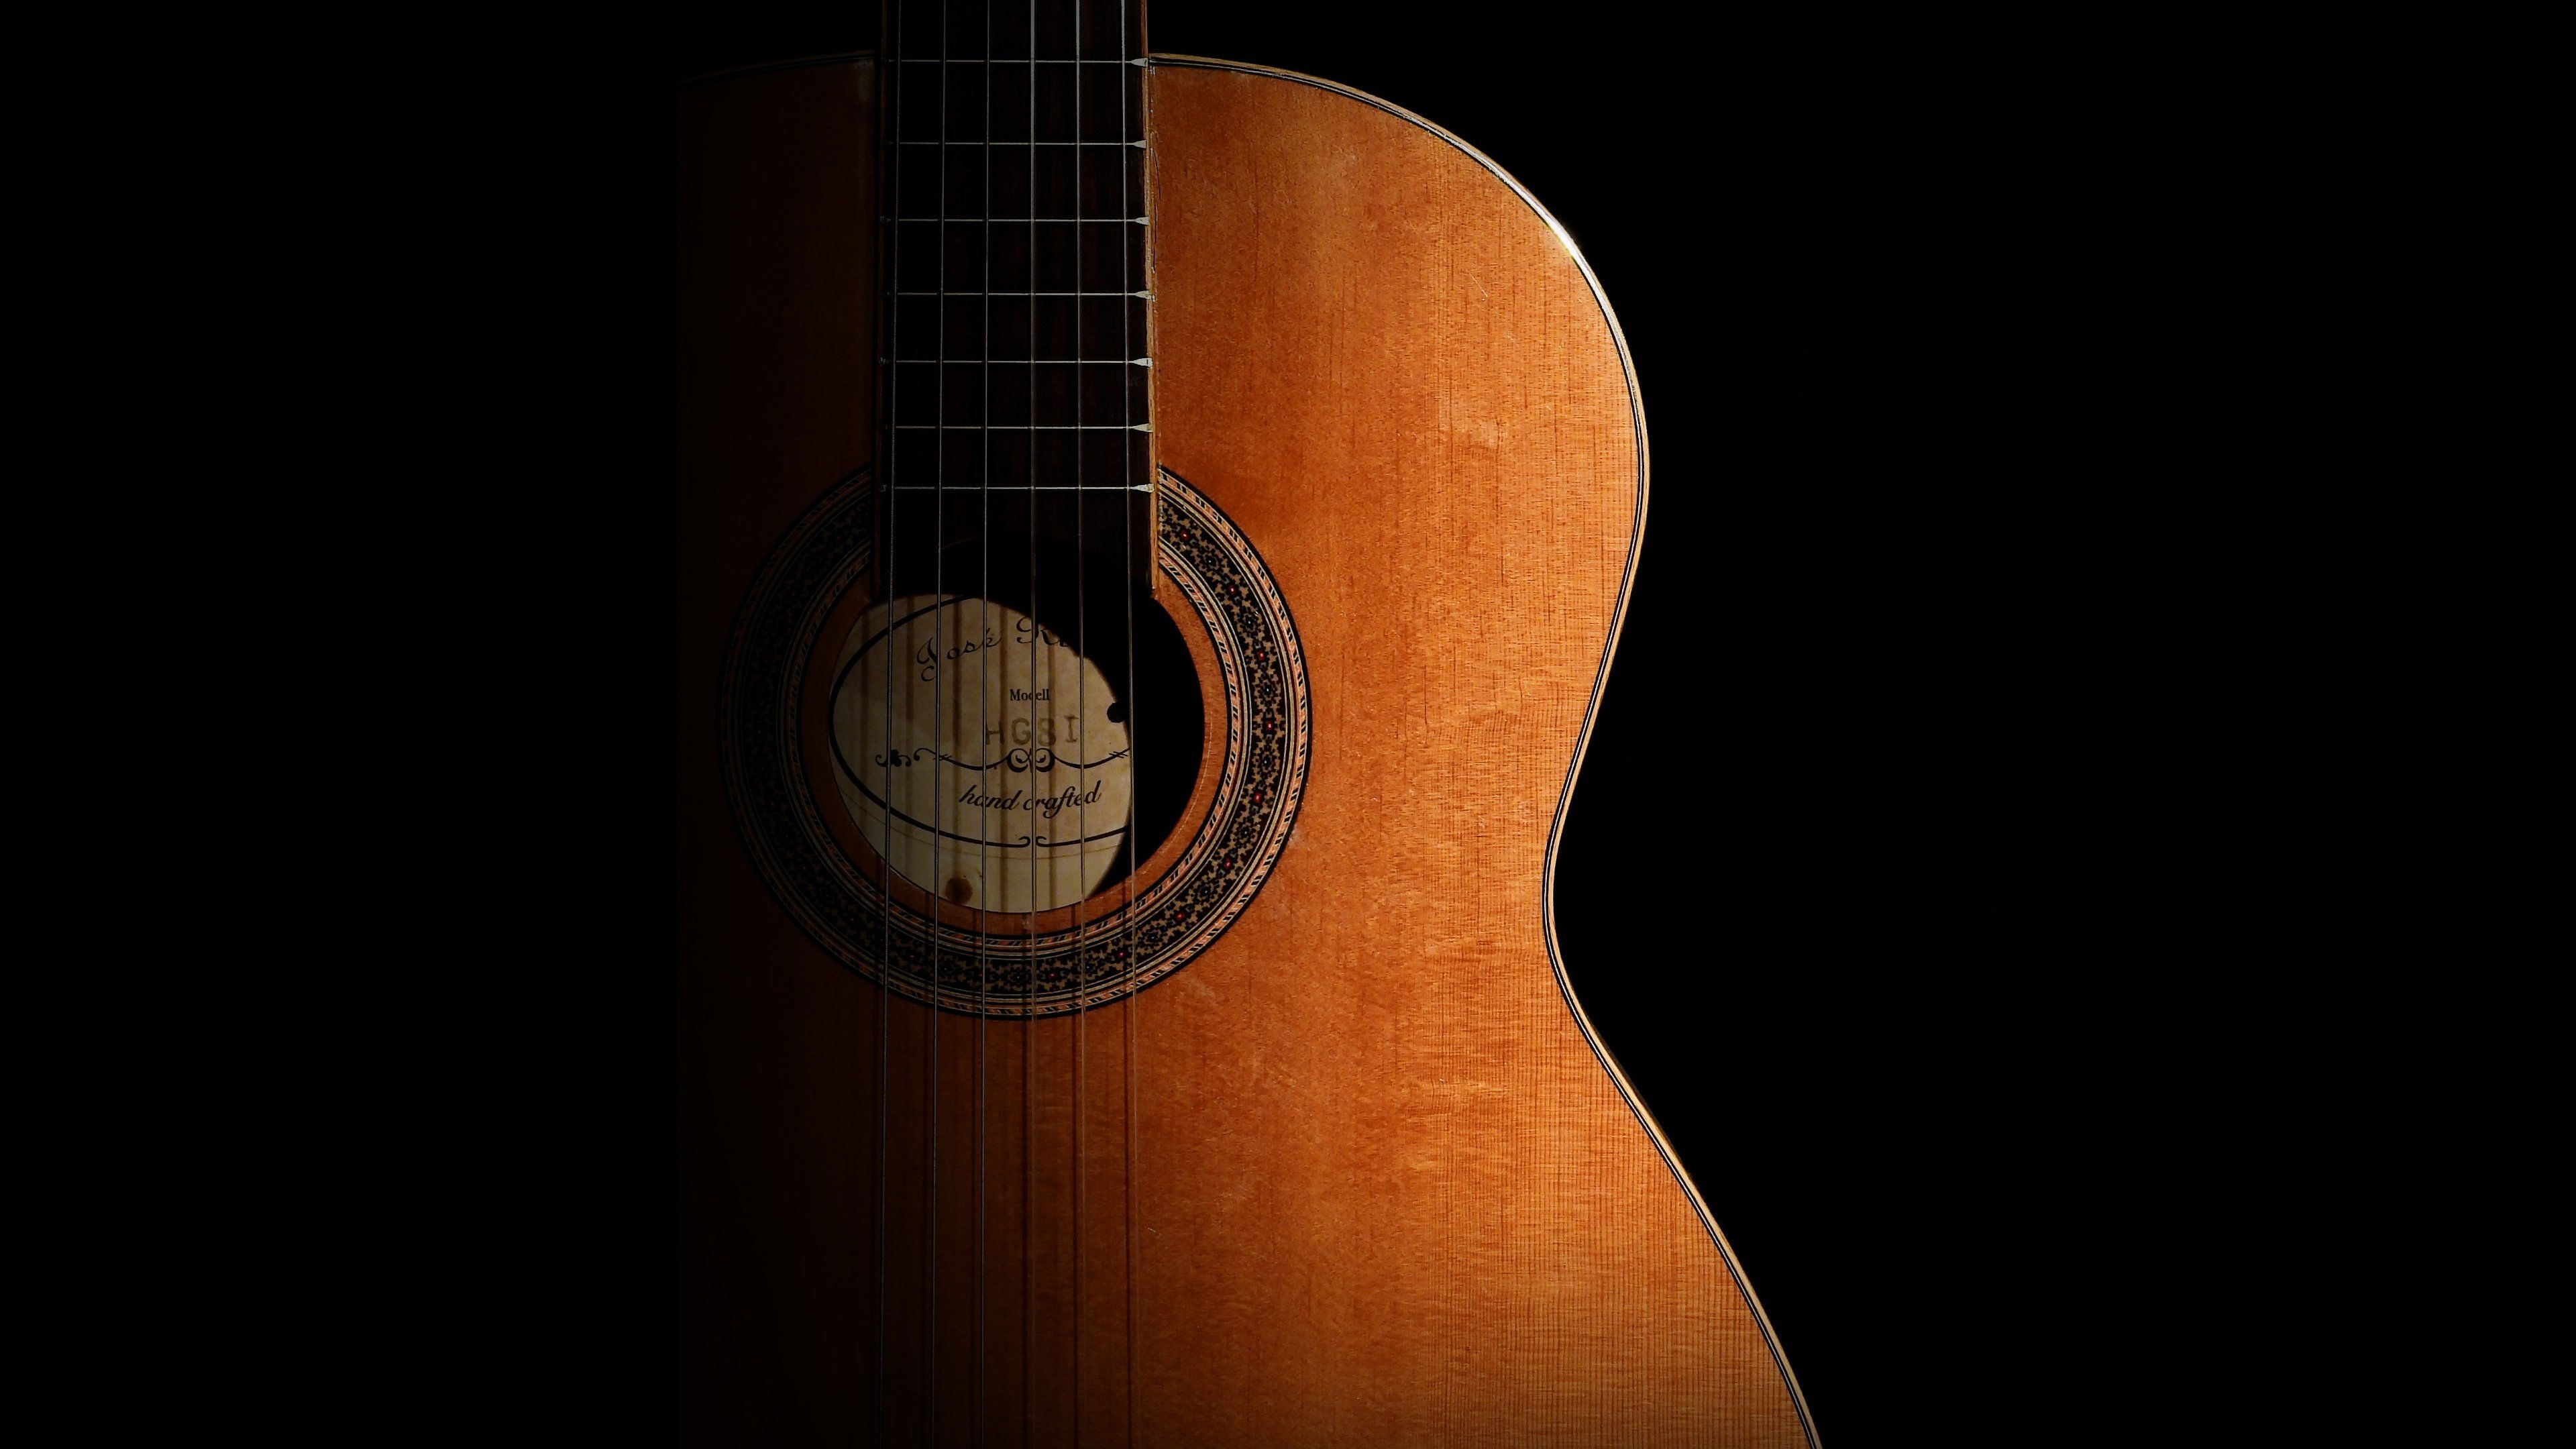 Guitar: A stringed musical instrument played by plucking or strumming with the fingers or a plectrum. 3840x2160 4K Wallpaper.